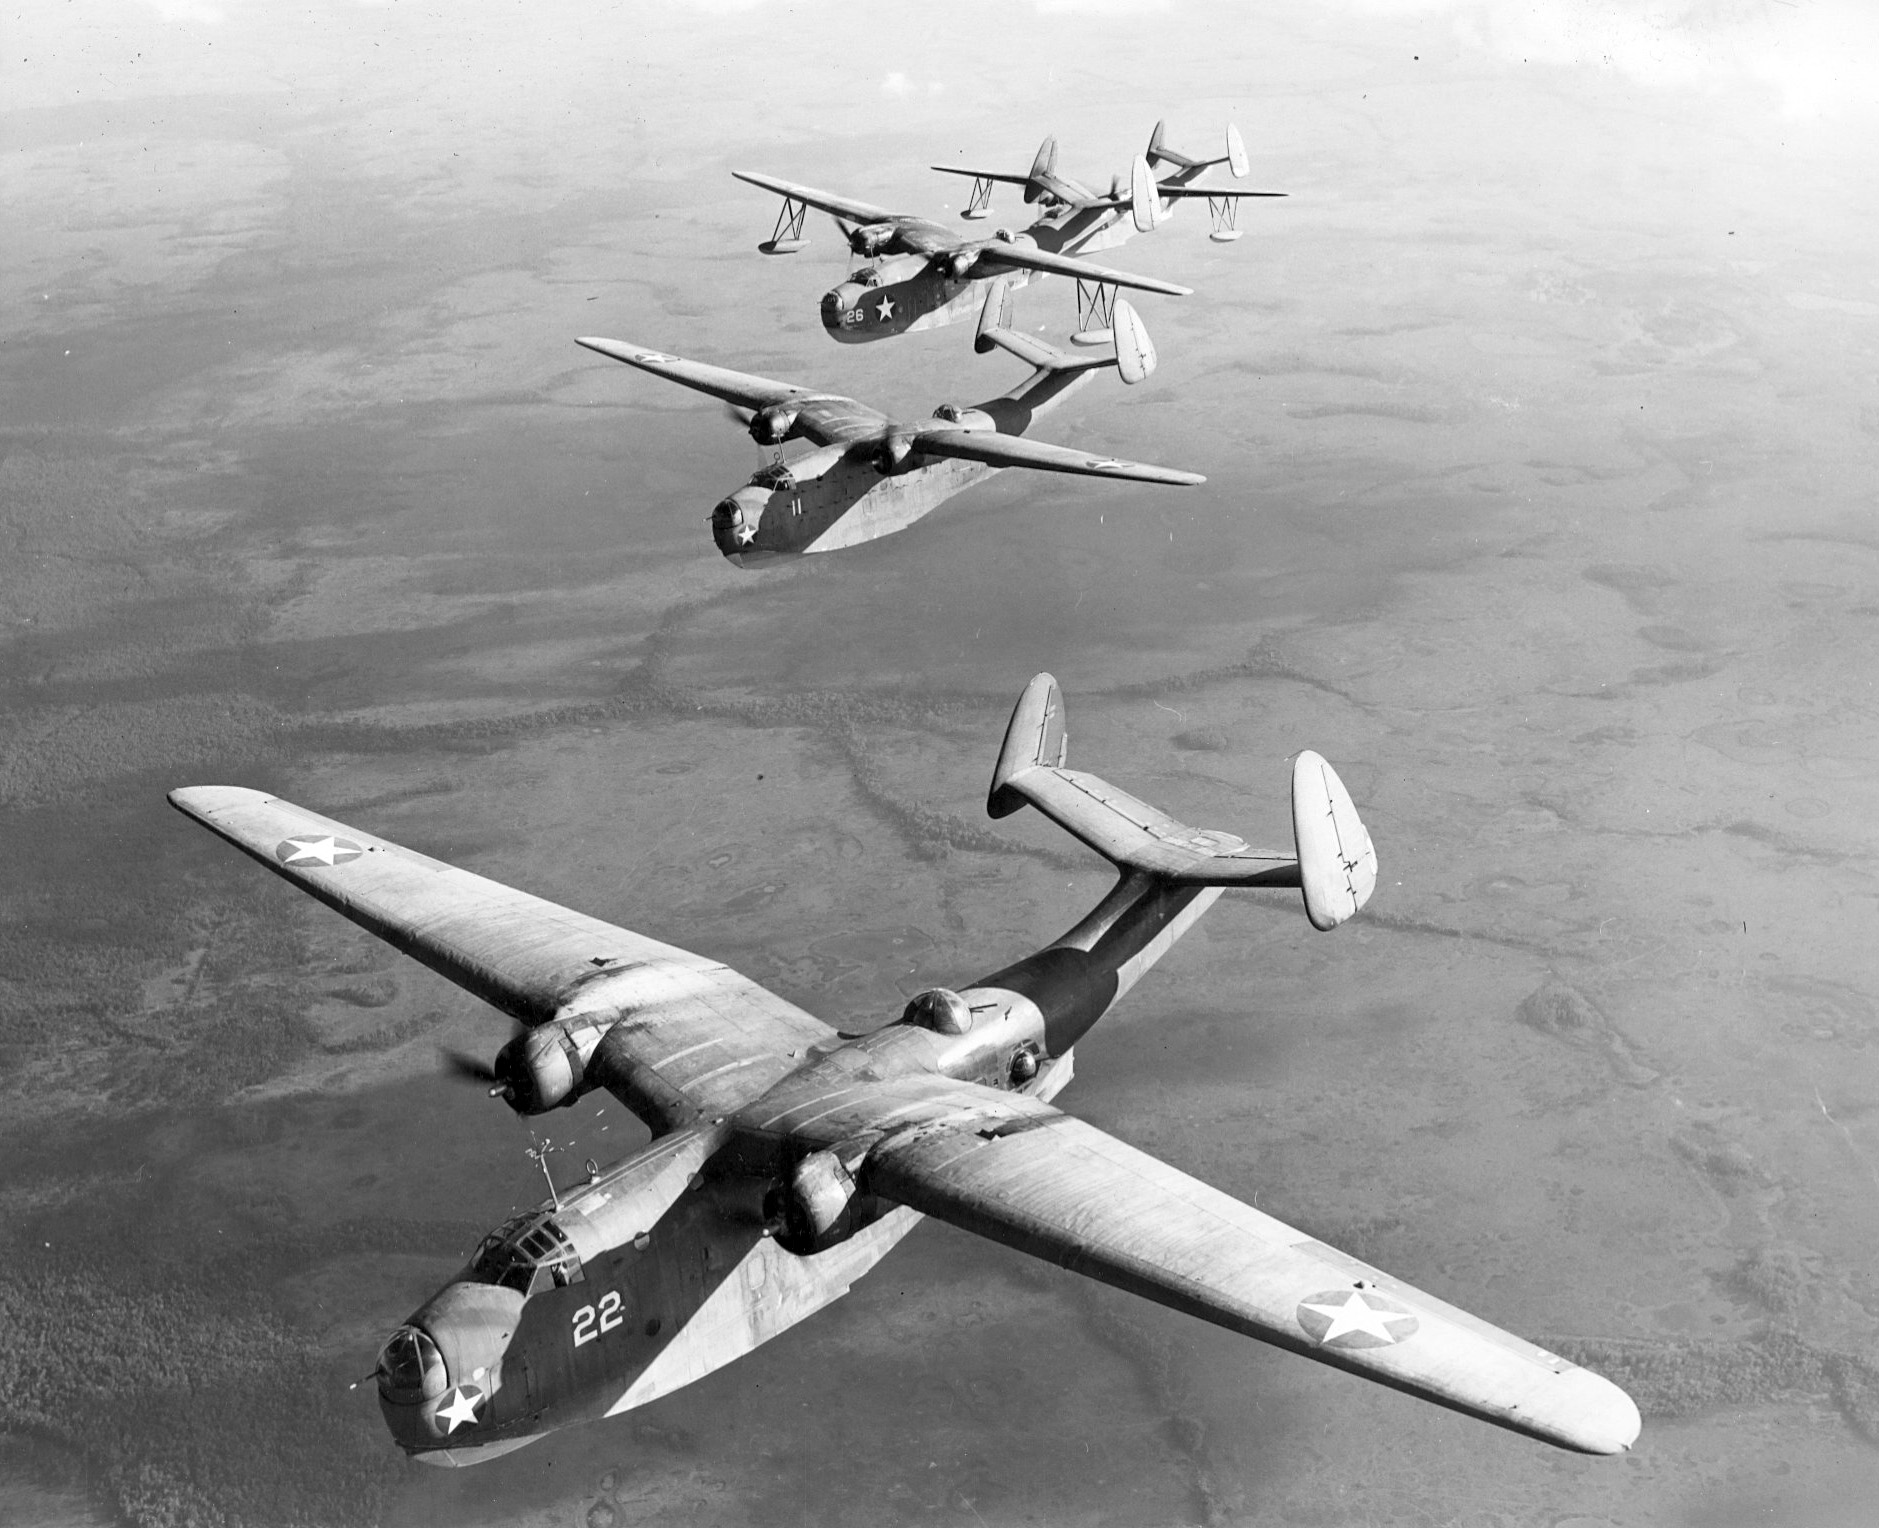 Two PBM-1 (front) and two PBM-3 (back) in flight, 1942. The PBM-1s are from an early production series with retractable floats that were discontinued for principal production. Location unknown. Photo 2 of 2